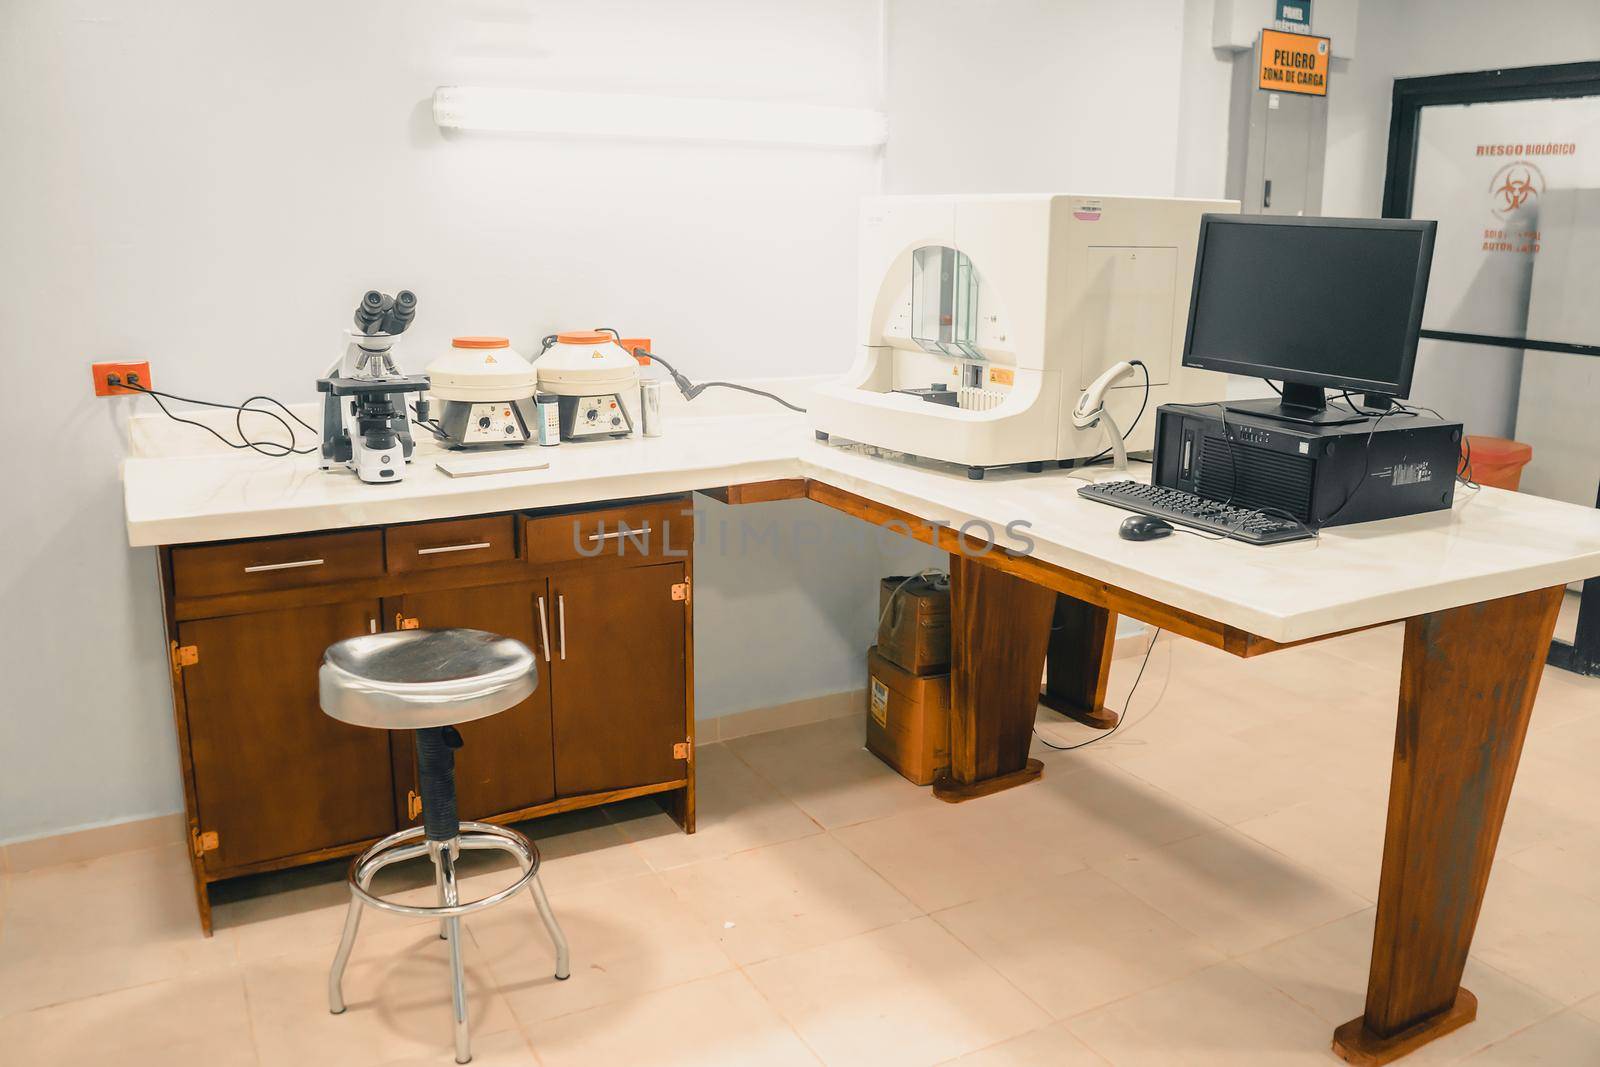 Small medical laboratory in Latin America with basic equipment to analyze blood samples